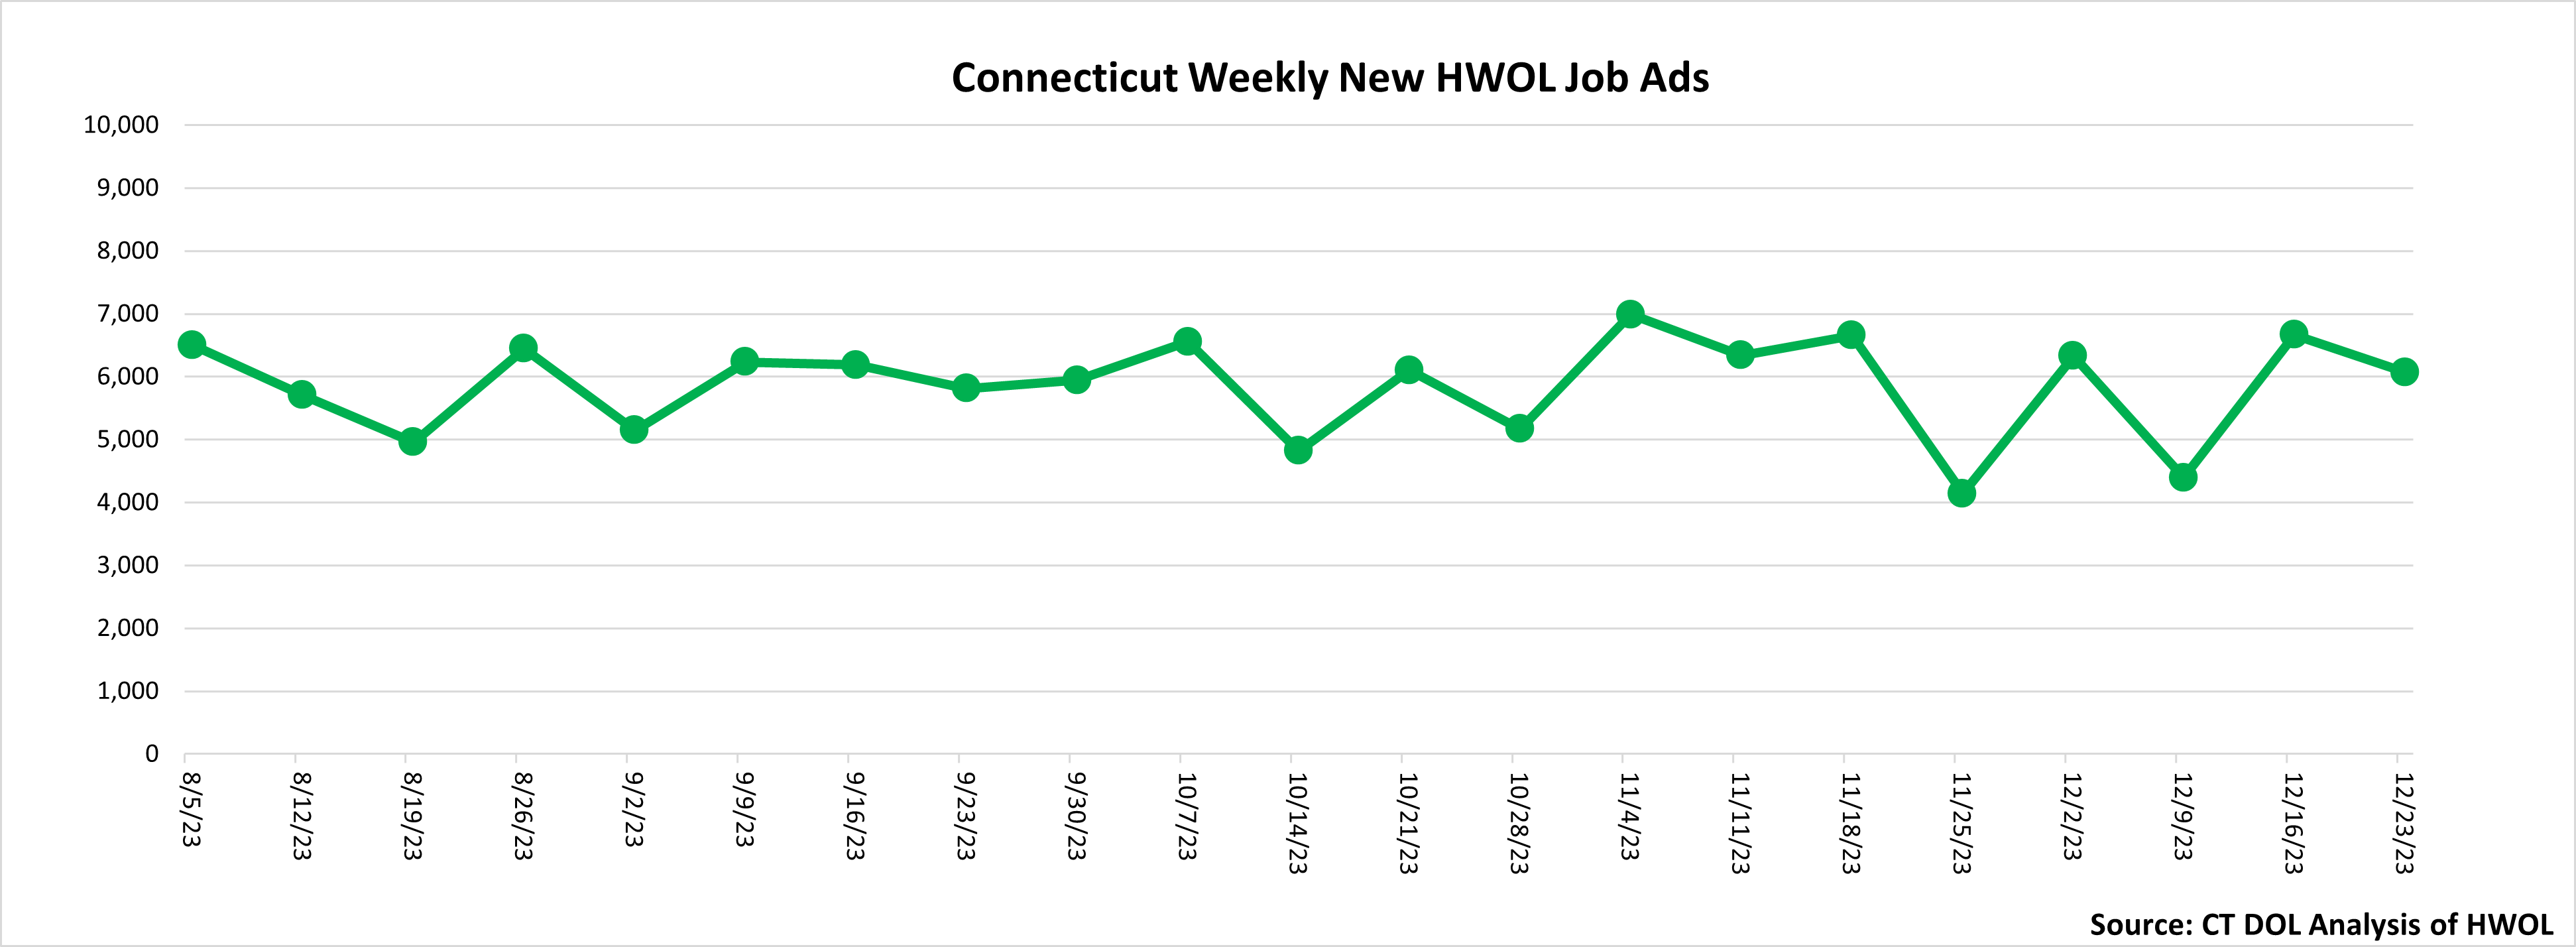 Connecticut Weekly Statewide New HWOL Job Ads through 12/23/23